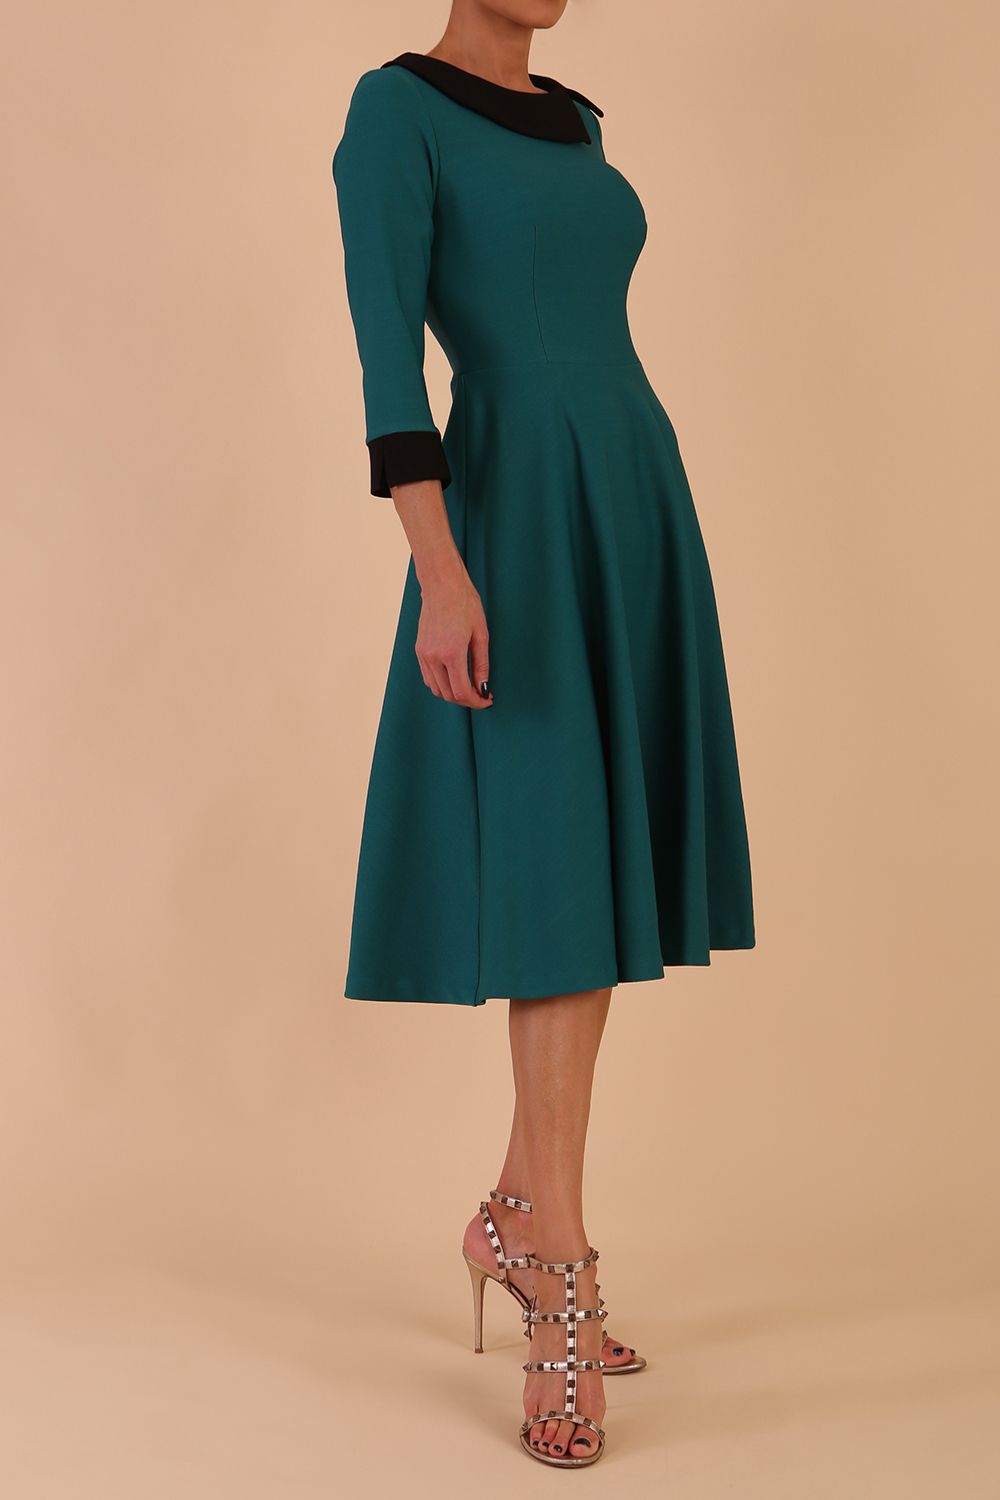 Model wearing Diva catwalk Coralia swing dress in pacific green / black contrast with three quarter sleeve figure fitted front image